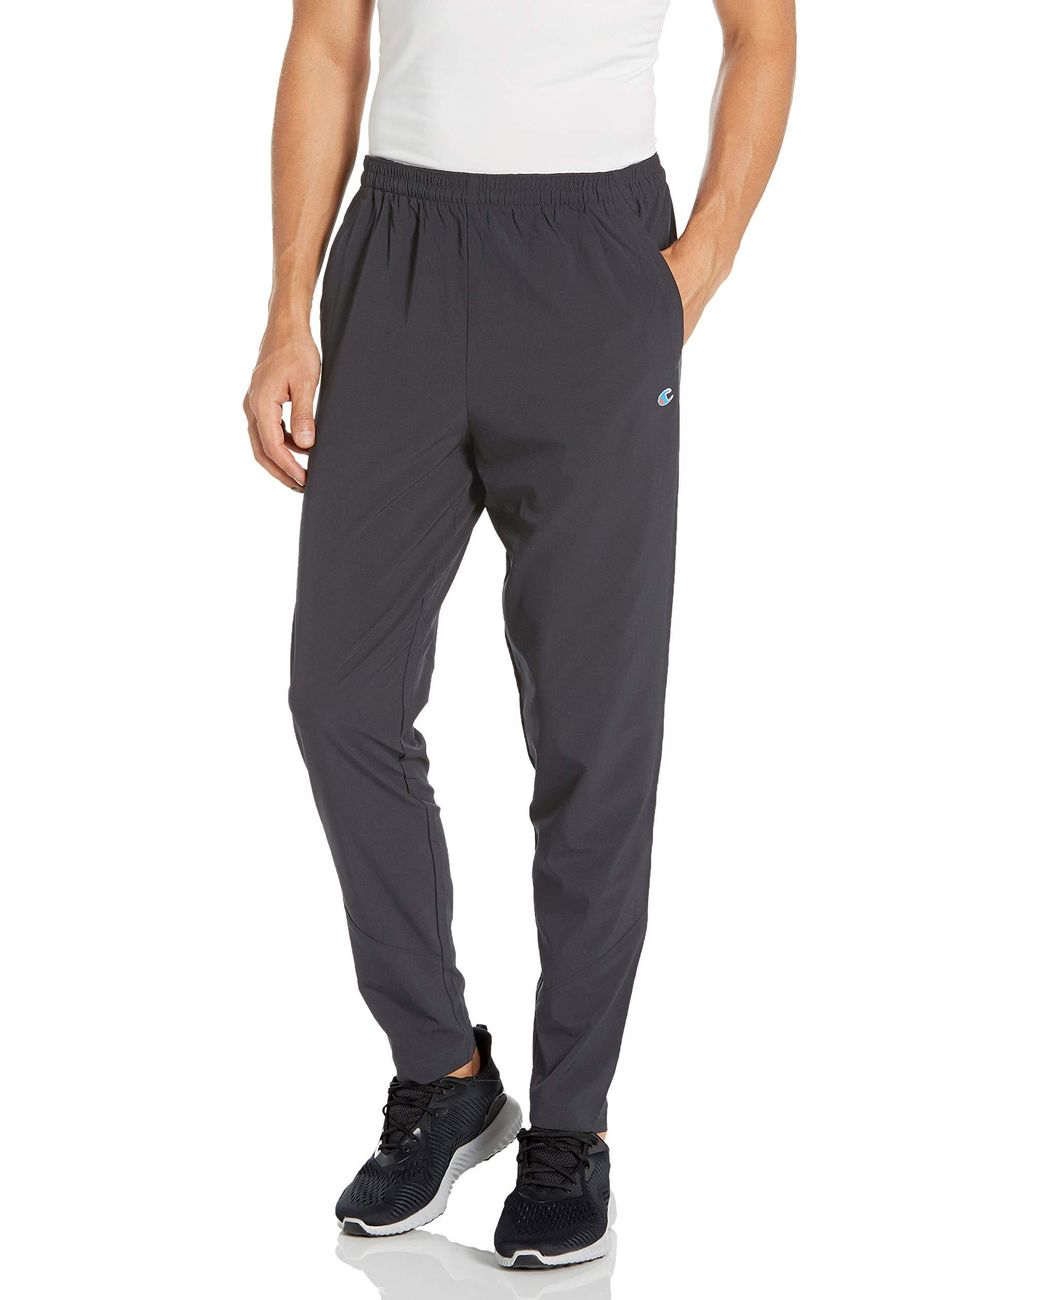 Champion Sweatpants in Gray for Men - Save 13% - Lyst